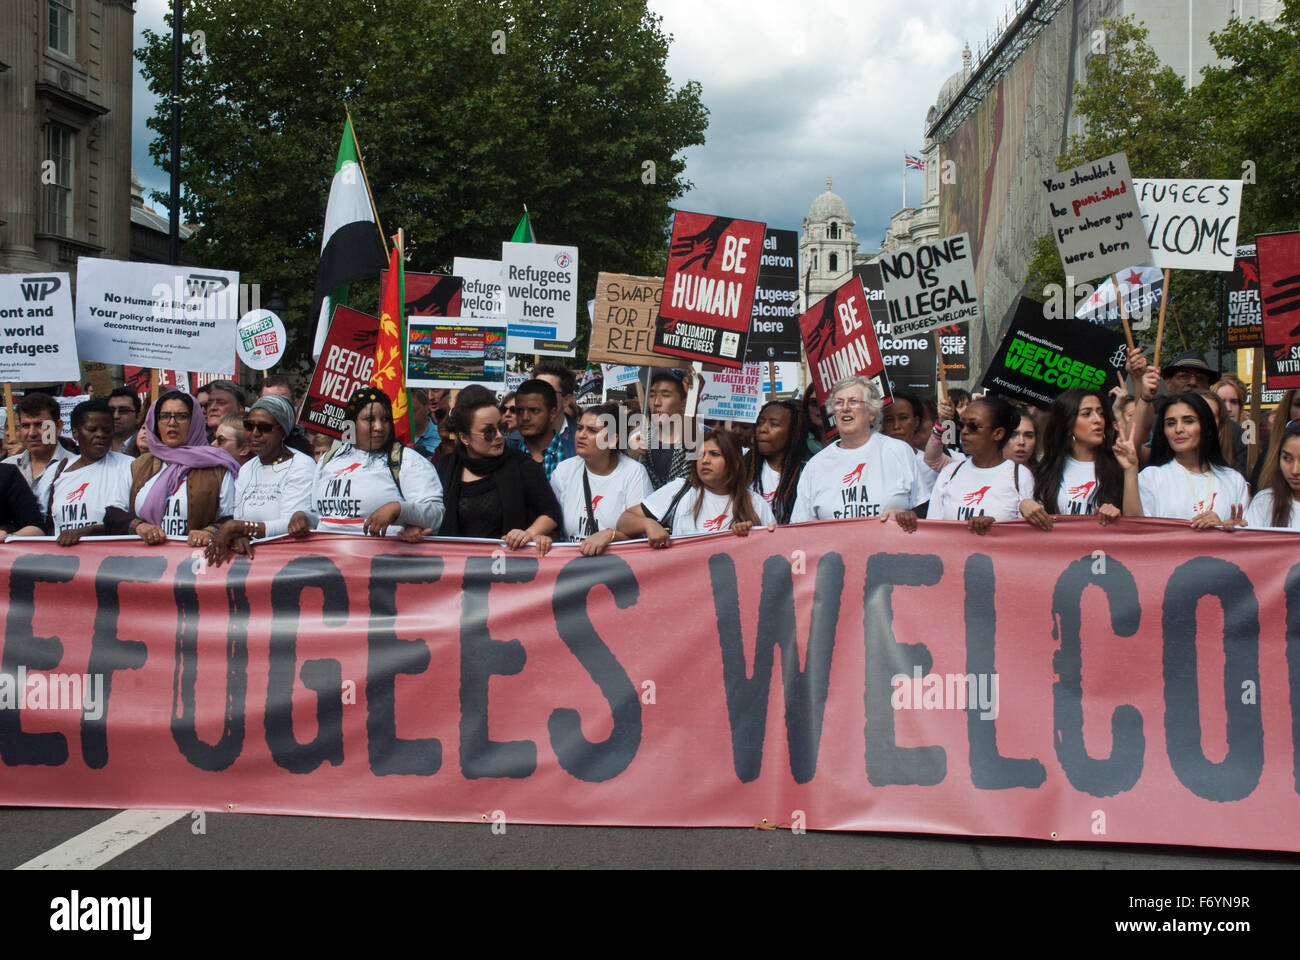 'Refugees welcome here' demonstration. Poster/ banner 'Refugees are Welcome Here' Stock Photo